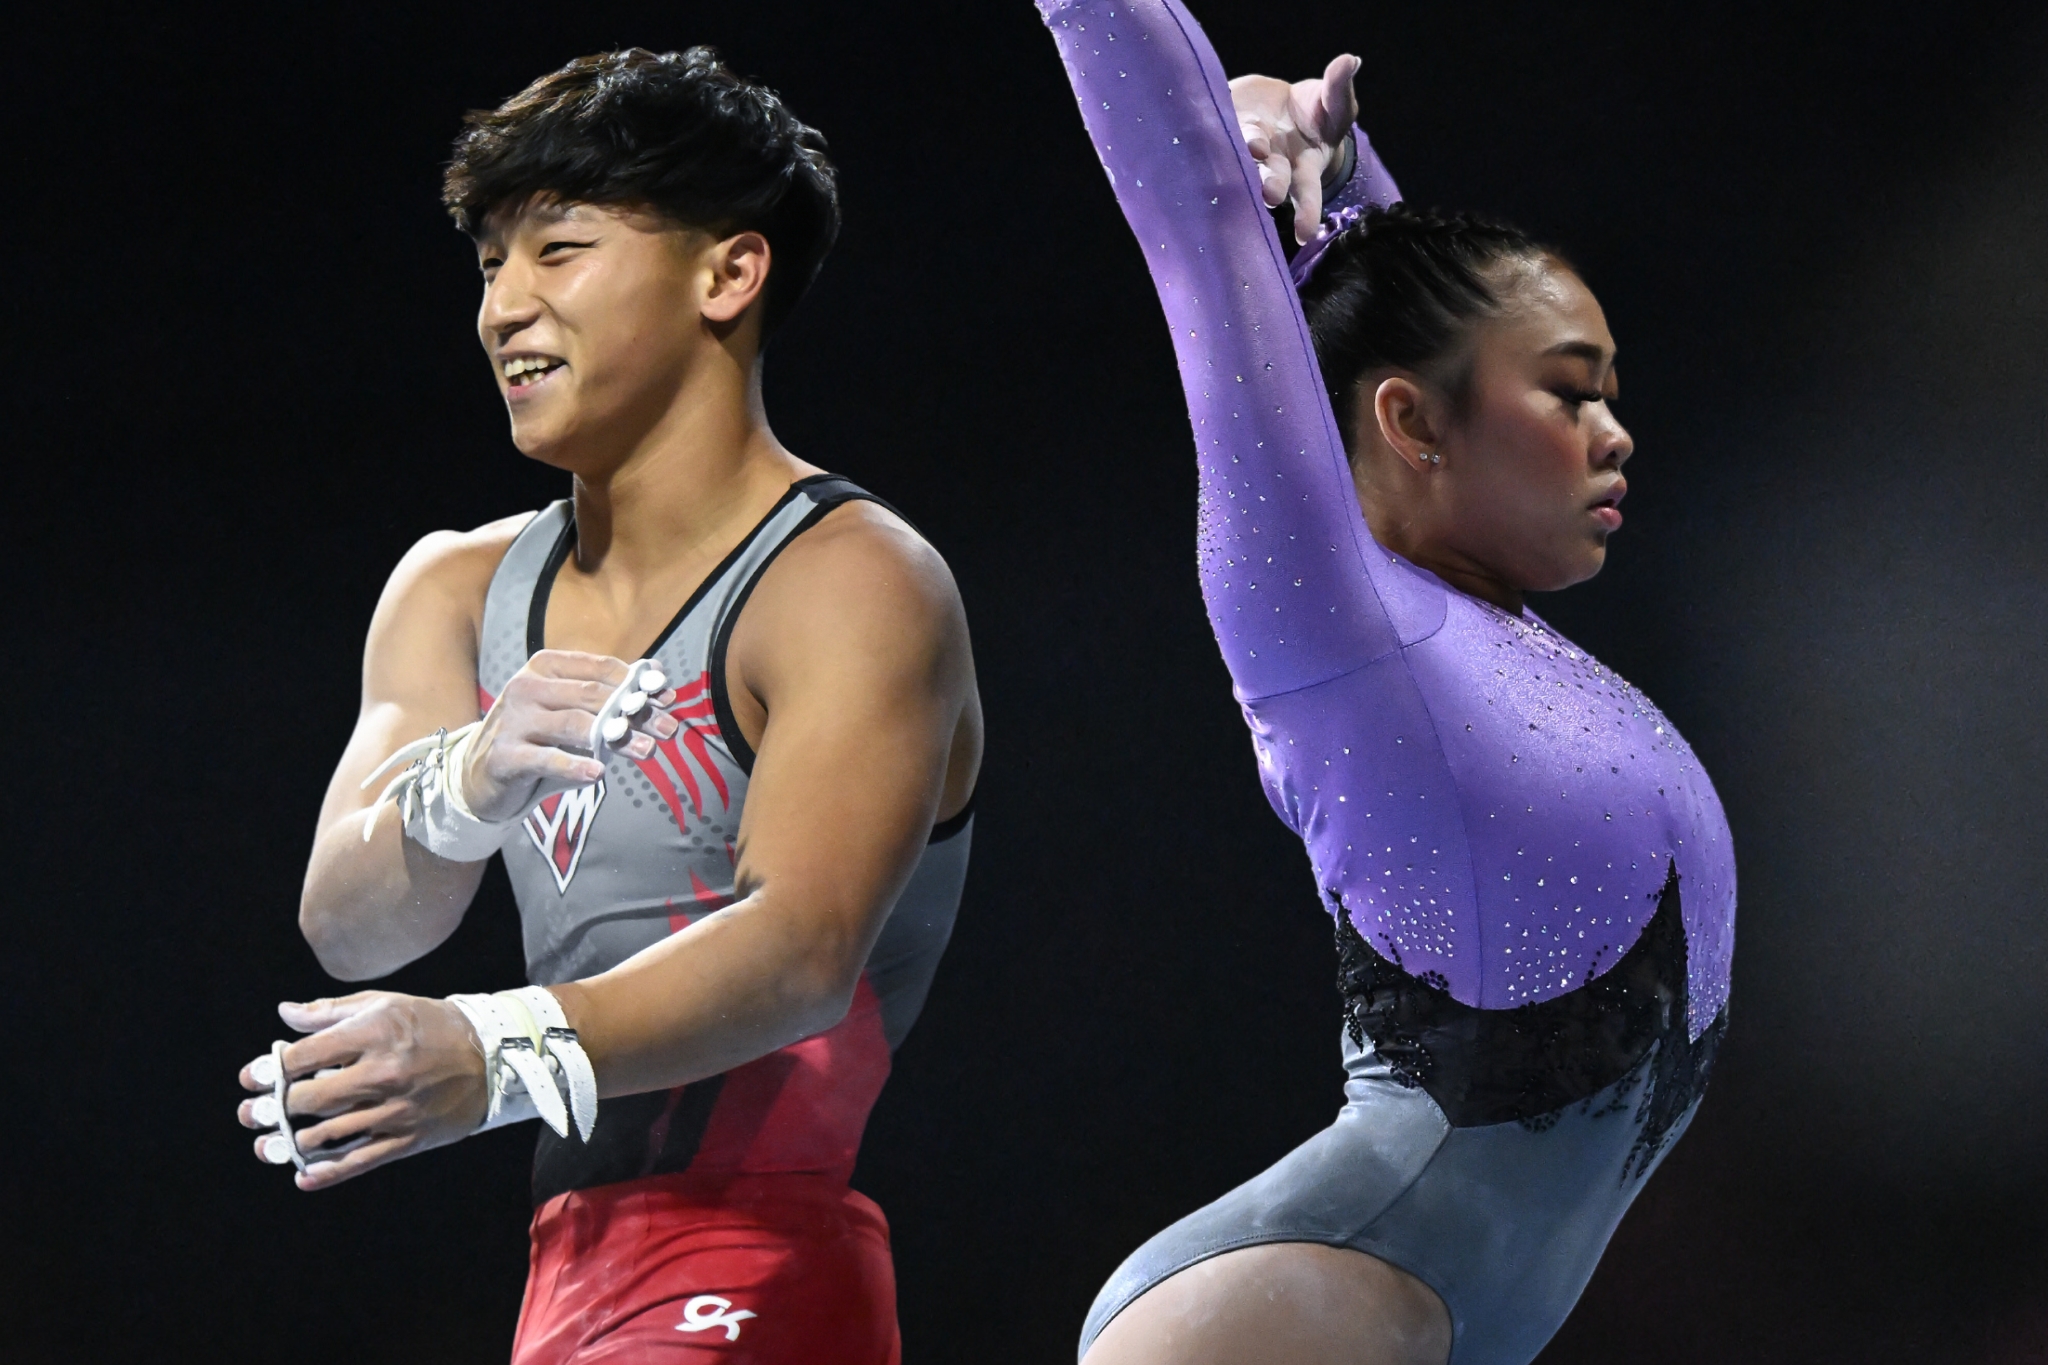 Yul Moldauer (left) and Suni Lee (right) will compete at the 2023 Xfinity U.S. Gymnastics Championships.